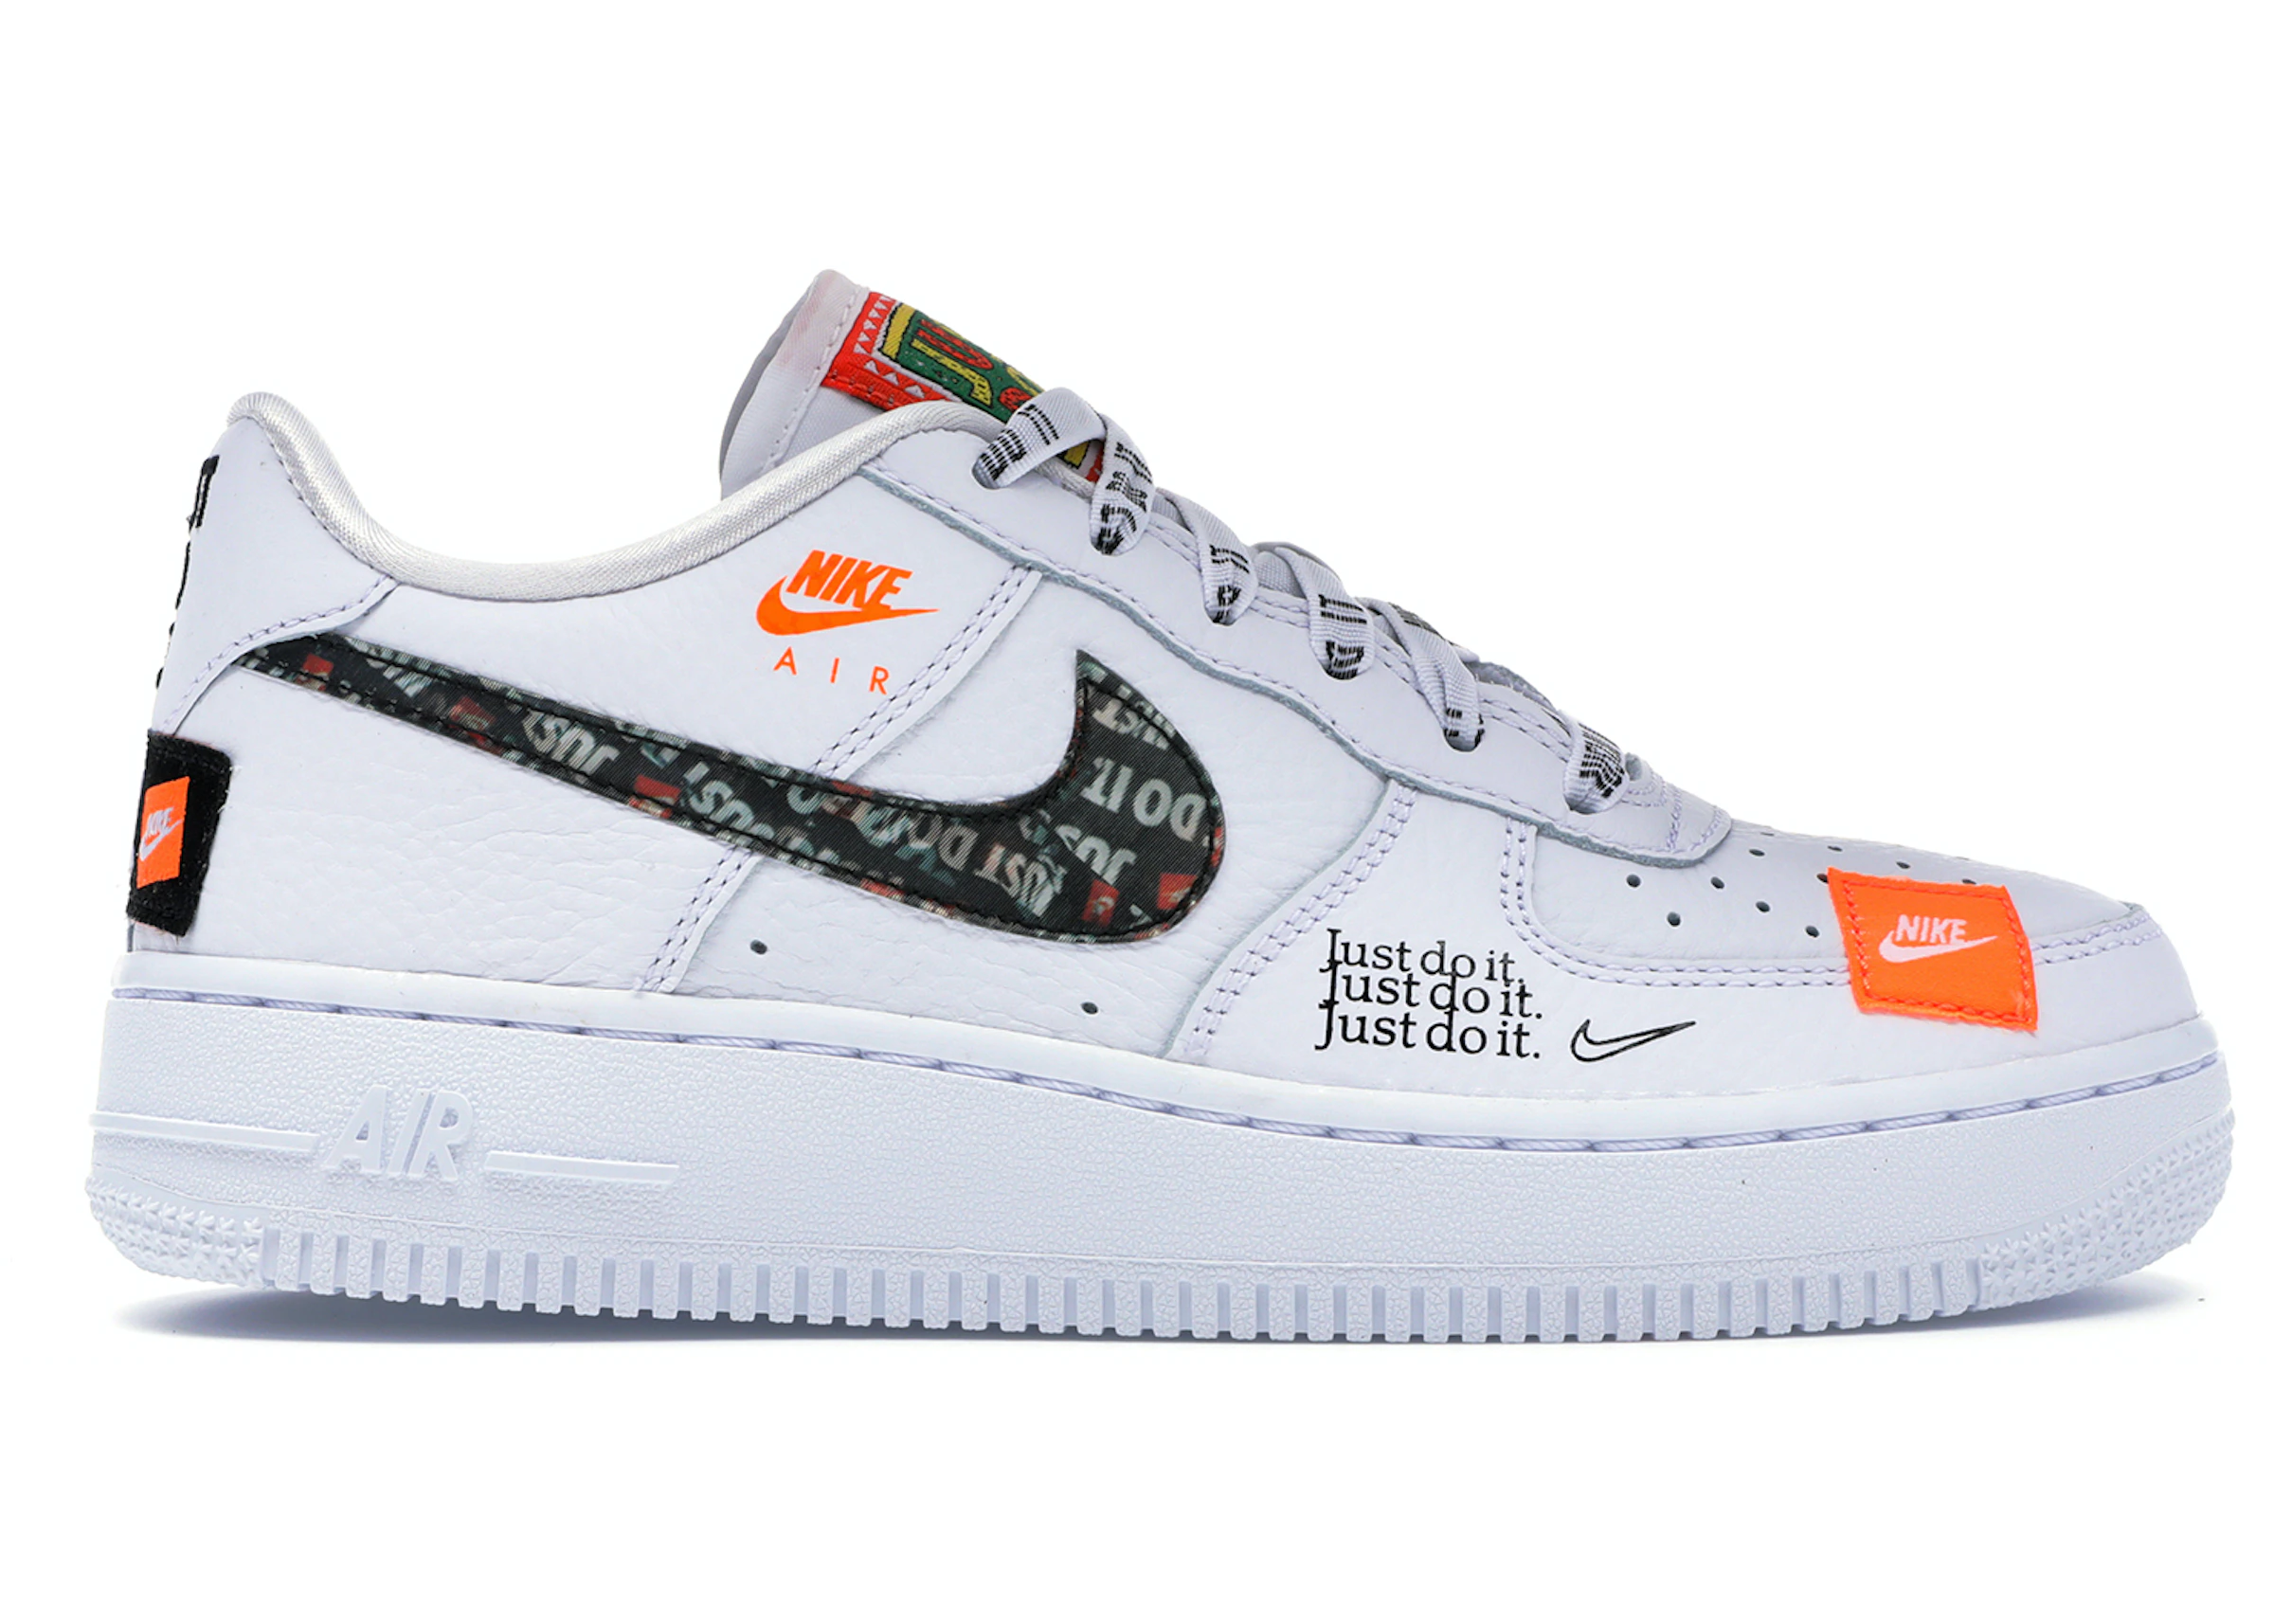 Nike Air Force 1 Low Just Do It Pack White (GS) - AO3977-100 -